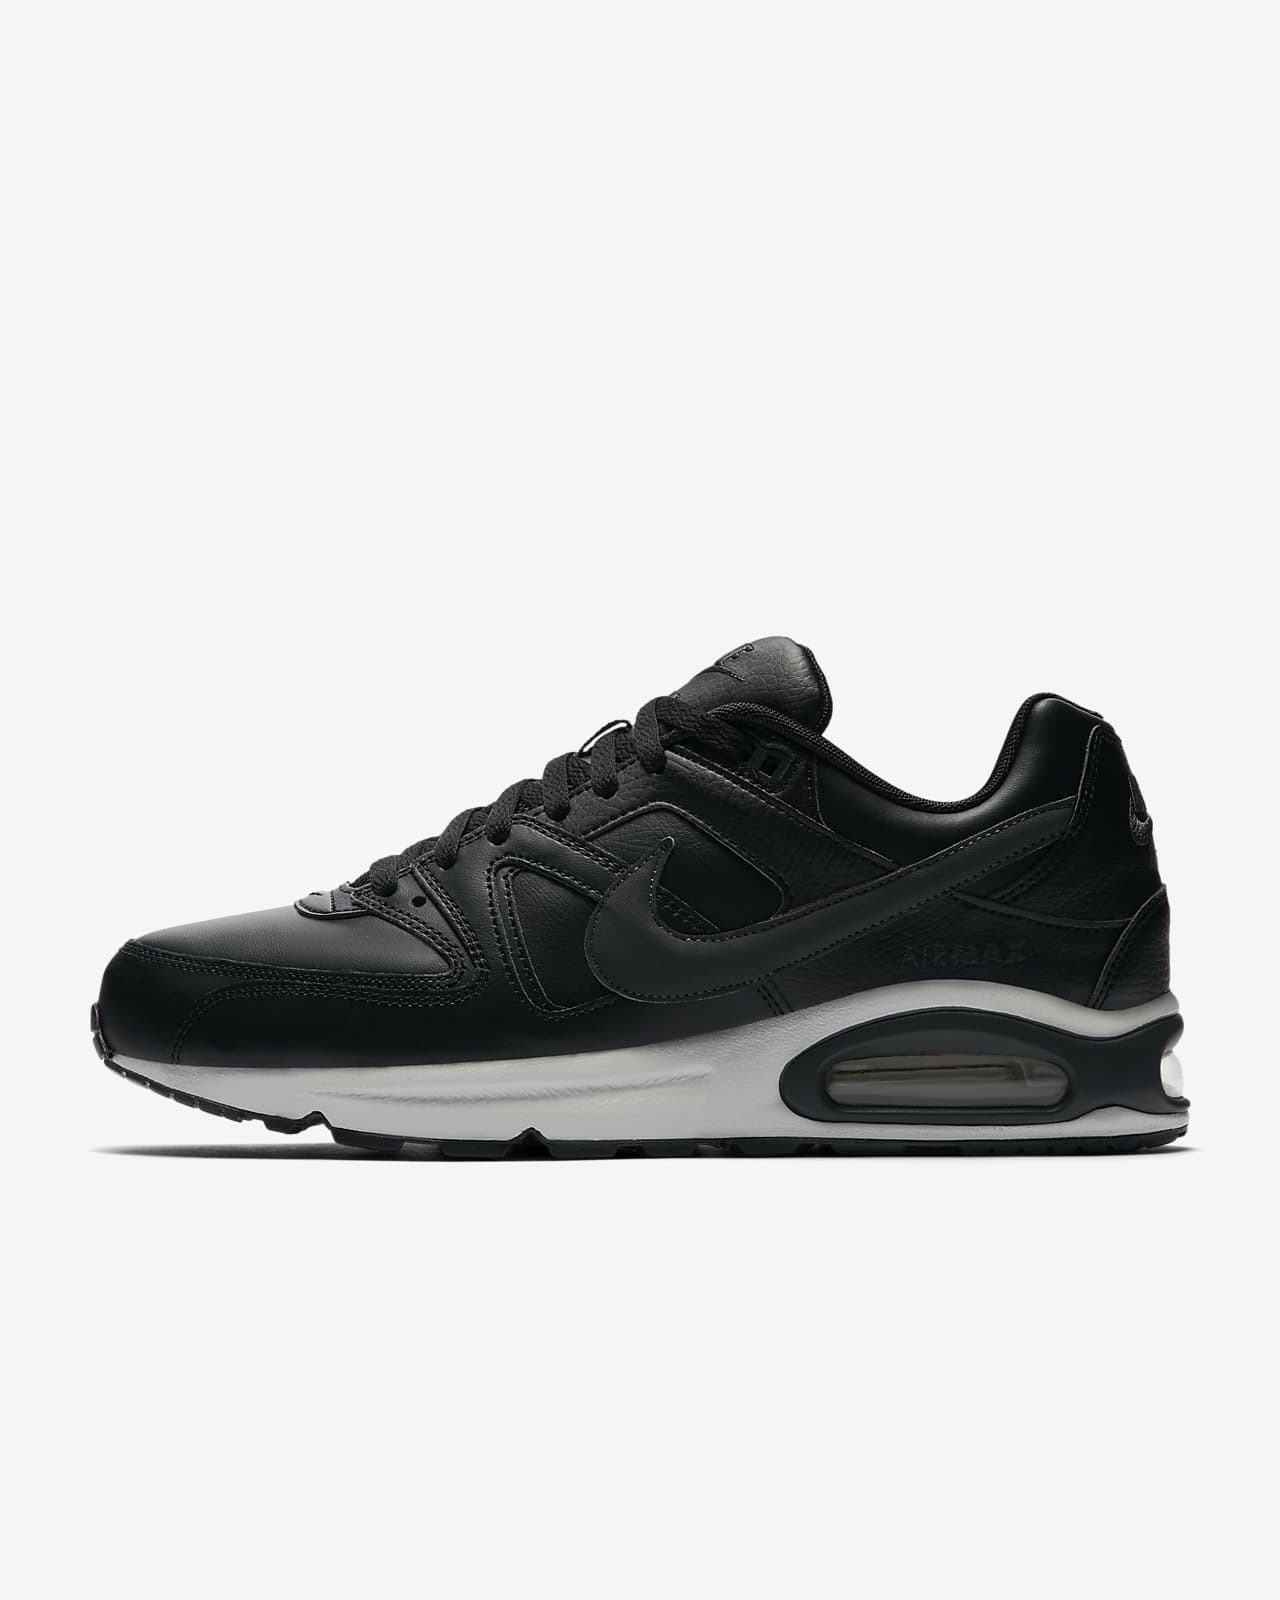 NIKE AIR MAX COMMAND LEATHER 26.5